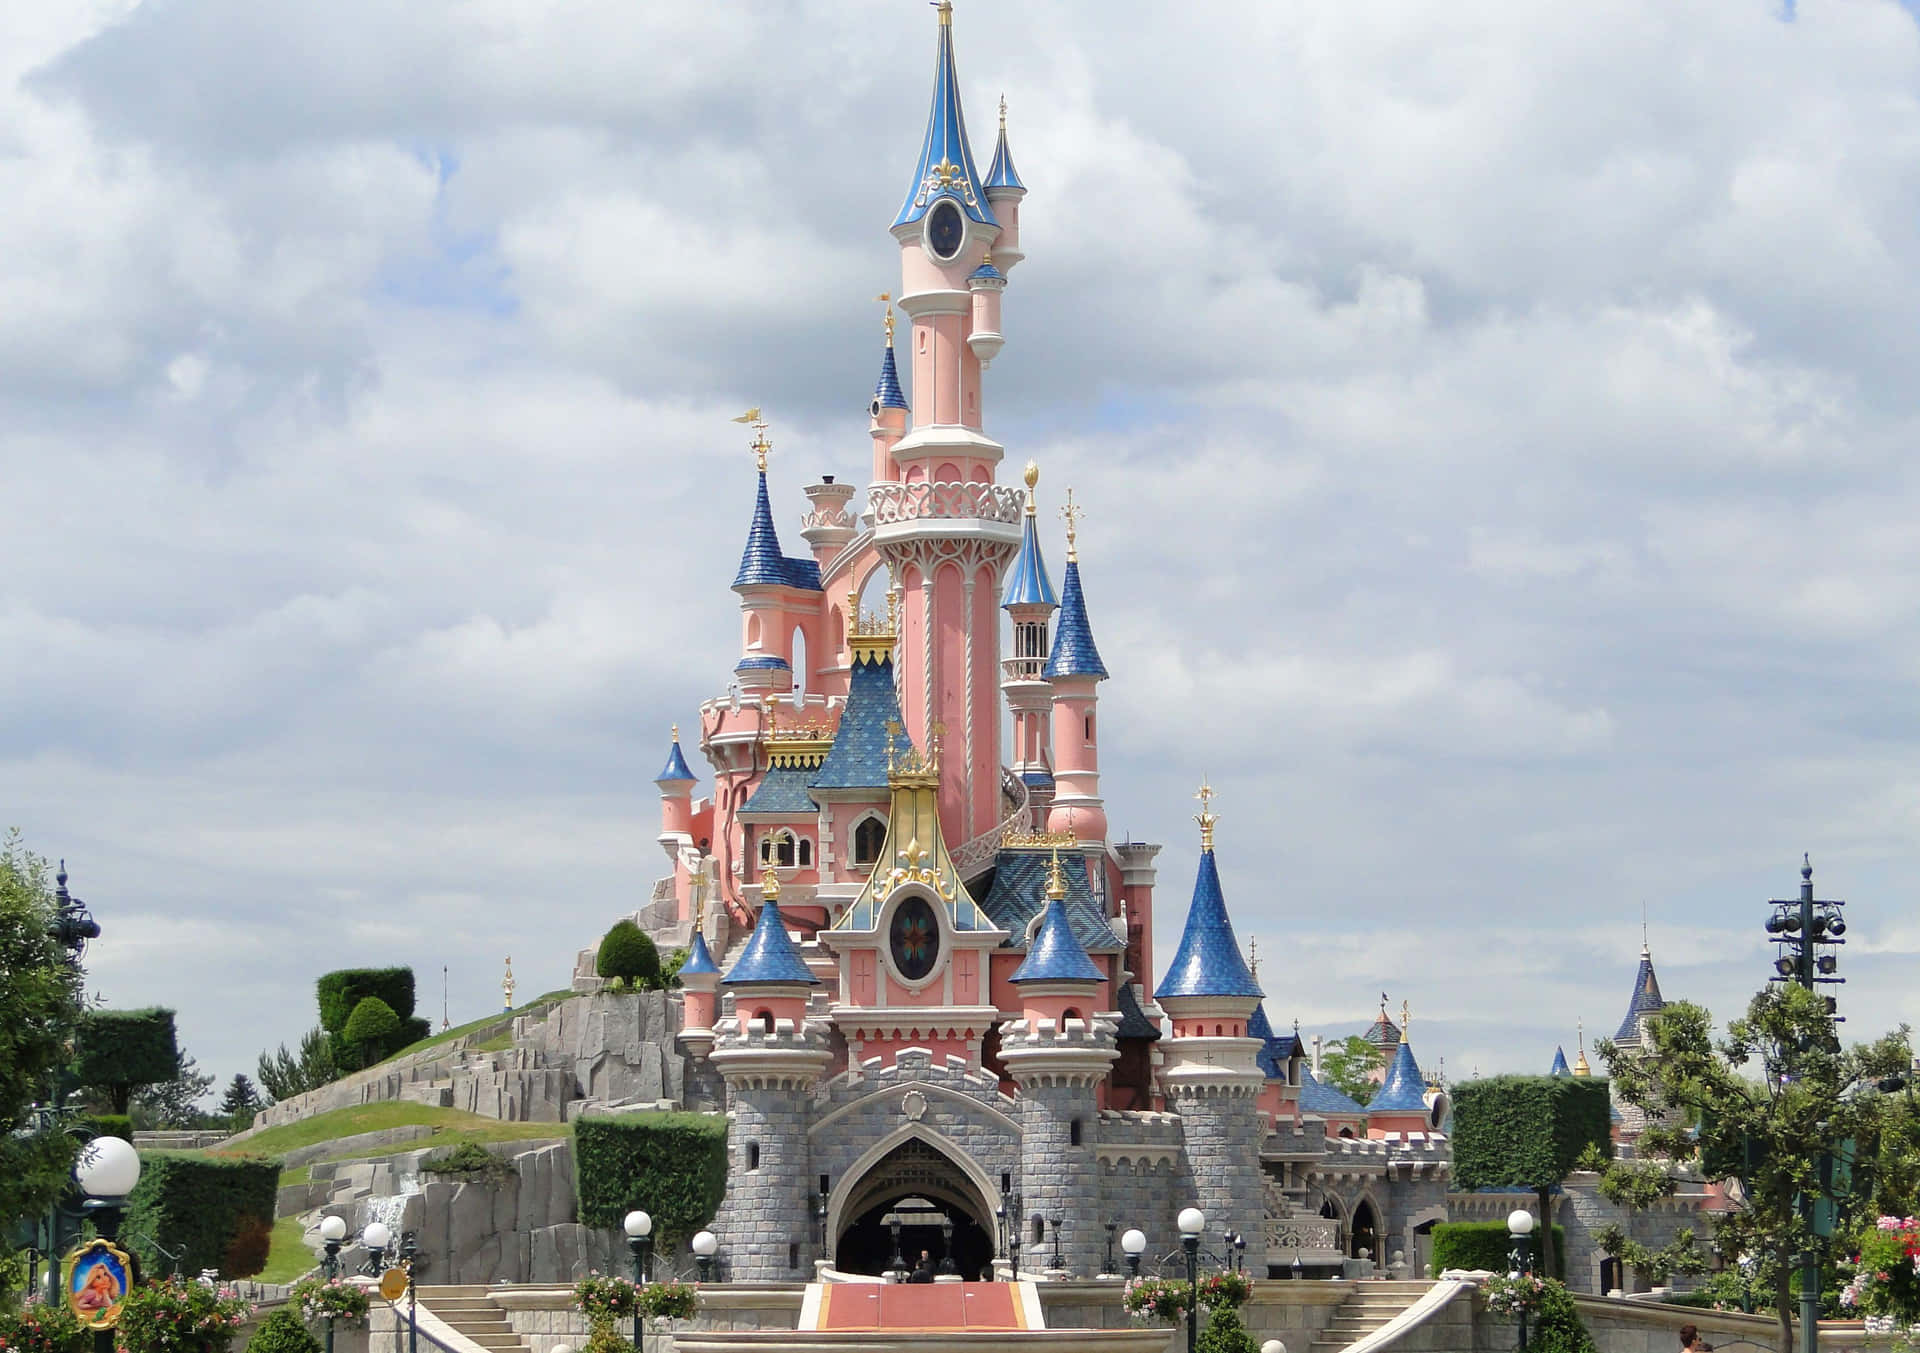 The castle at Disneyland Paris, a great place to go with kids in France. - Disneyland